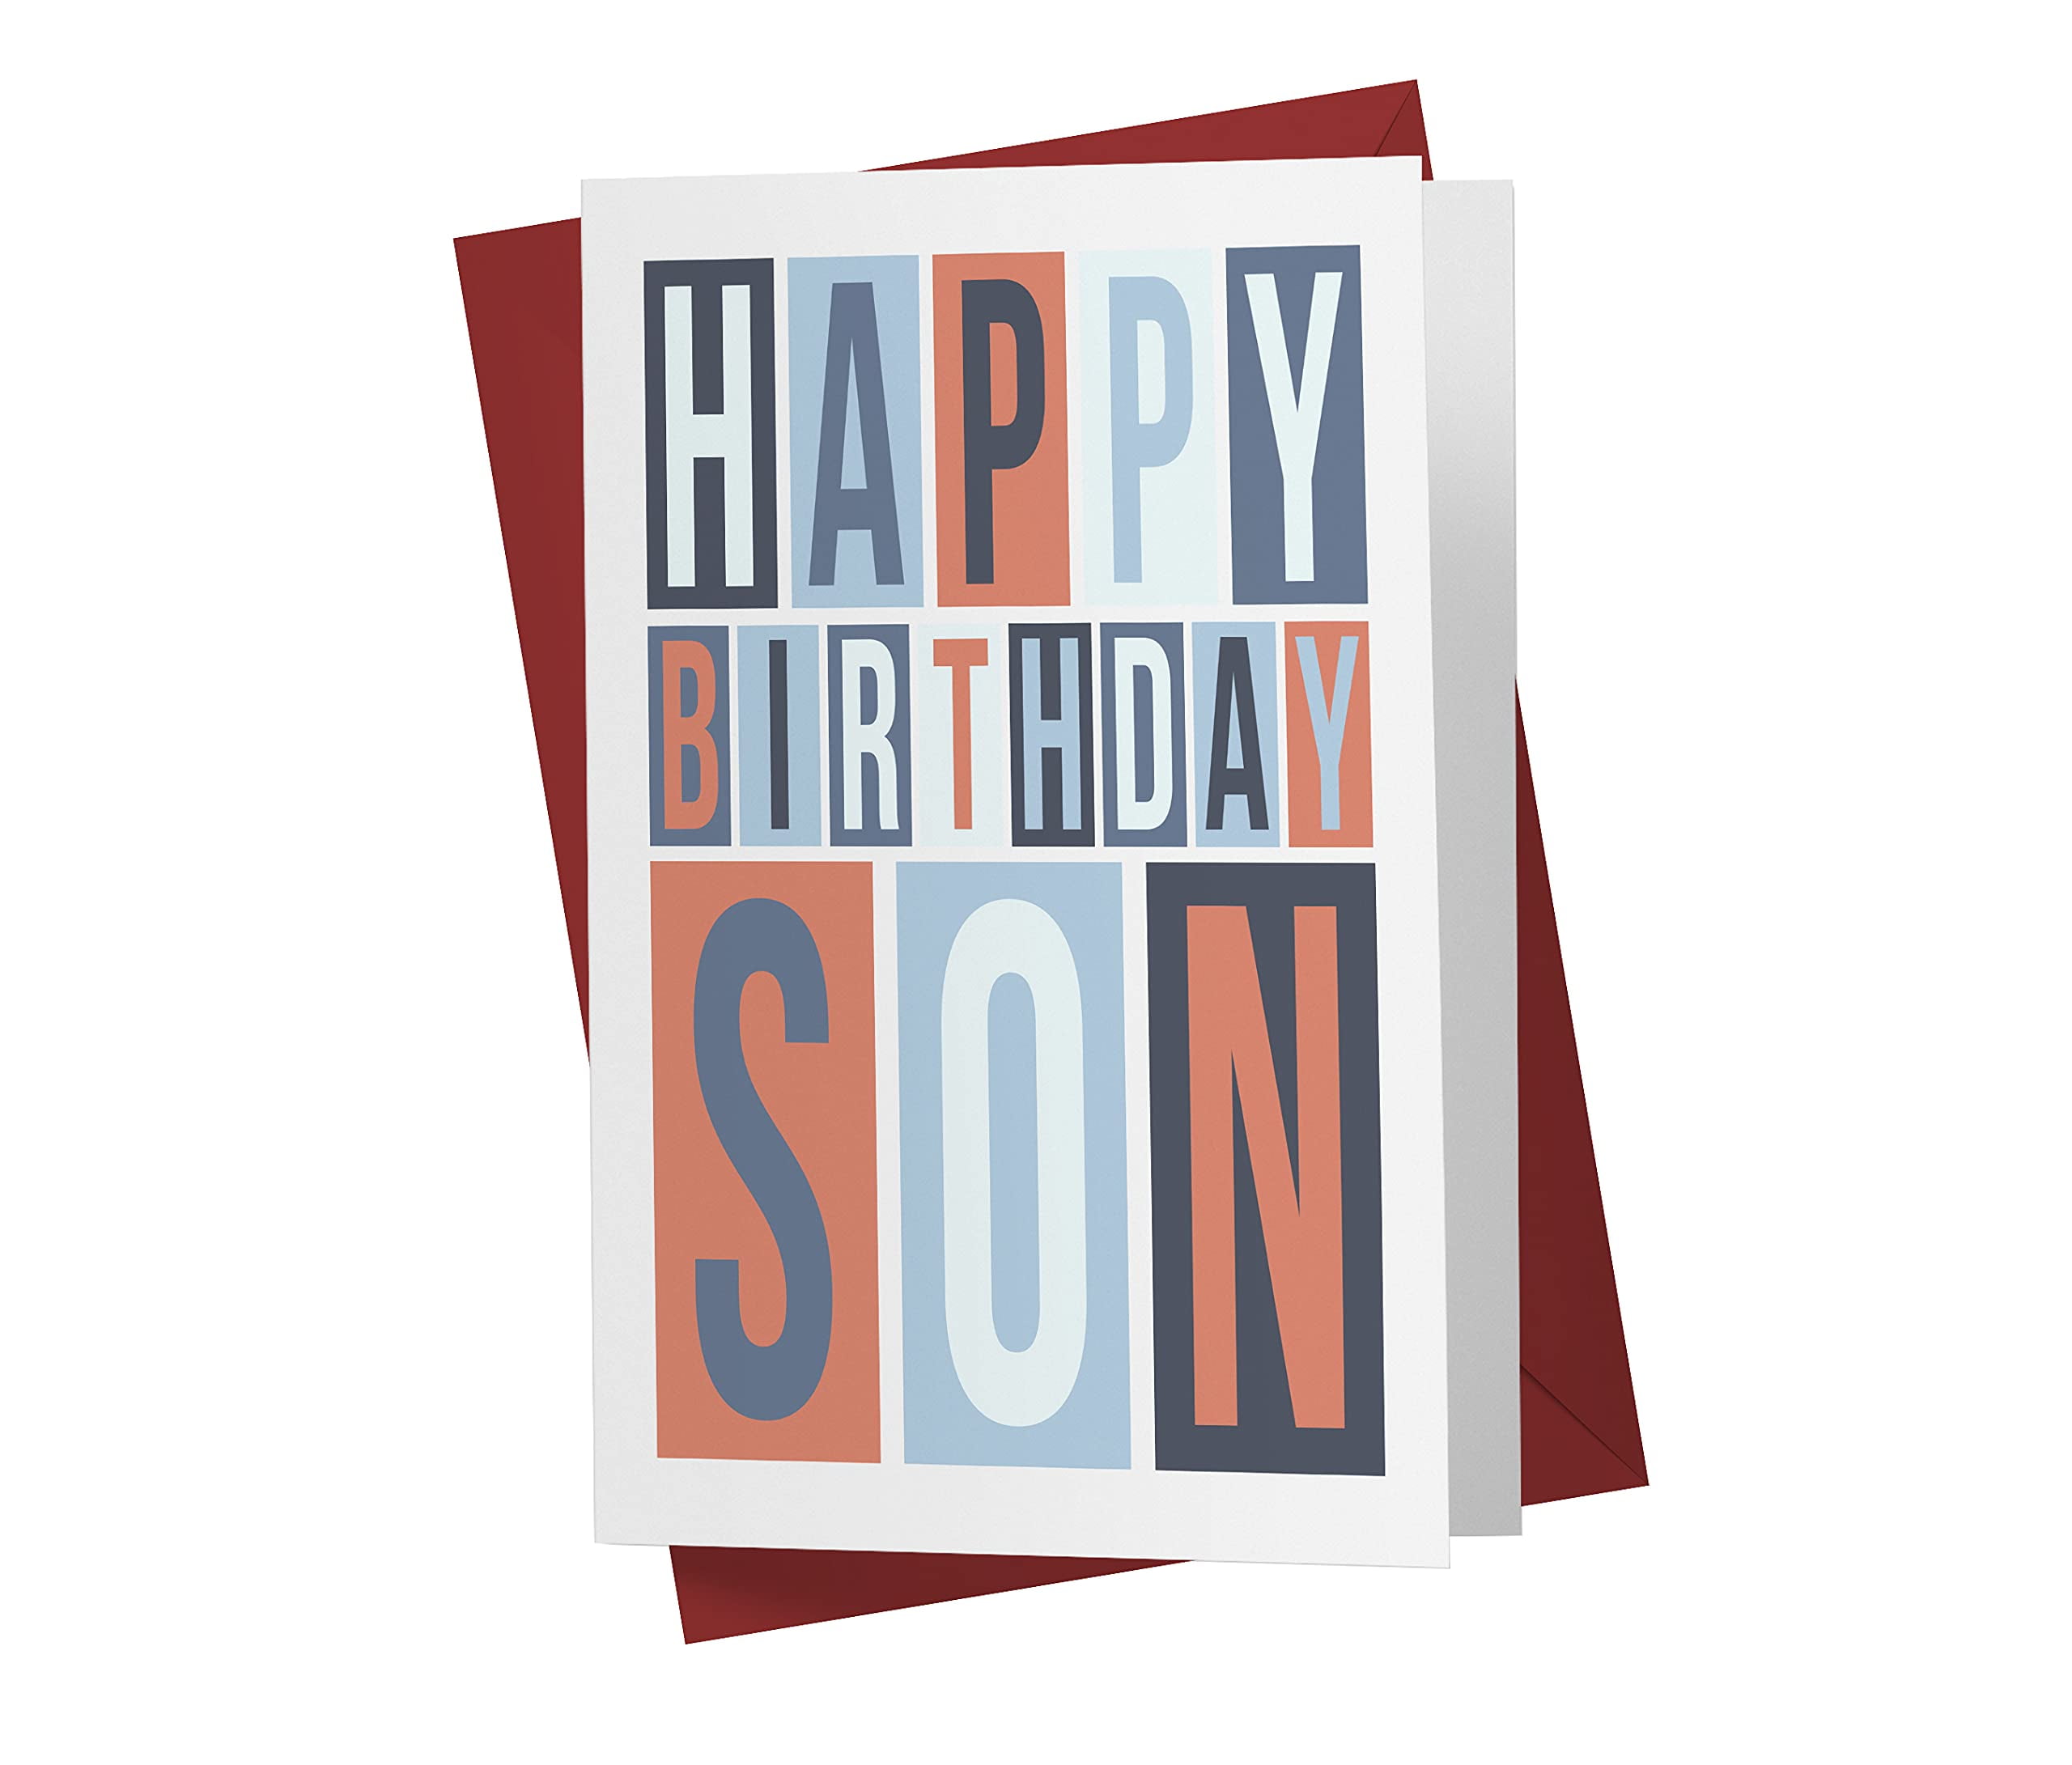 Sweet and Funny Birthday Card For Son, Happy Birthday Card For Him, Single  Large  x  Greeting Card, Birthday Card For Son Adult, Birthday Cards  For Son From Parents, Birthday Card